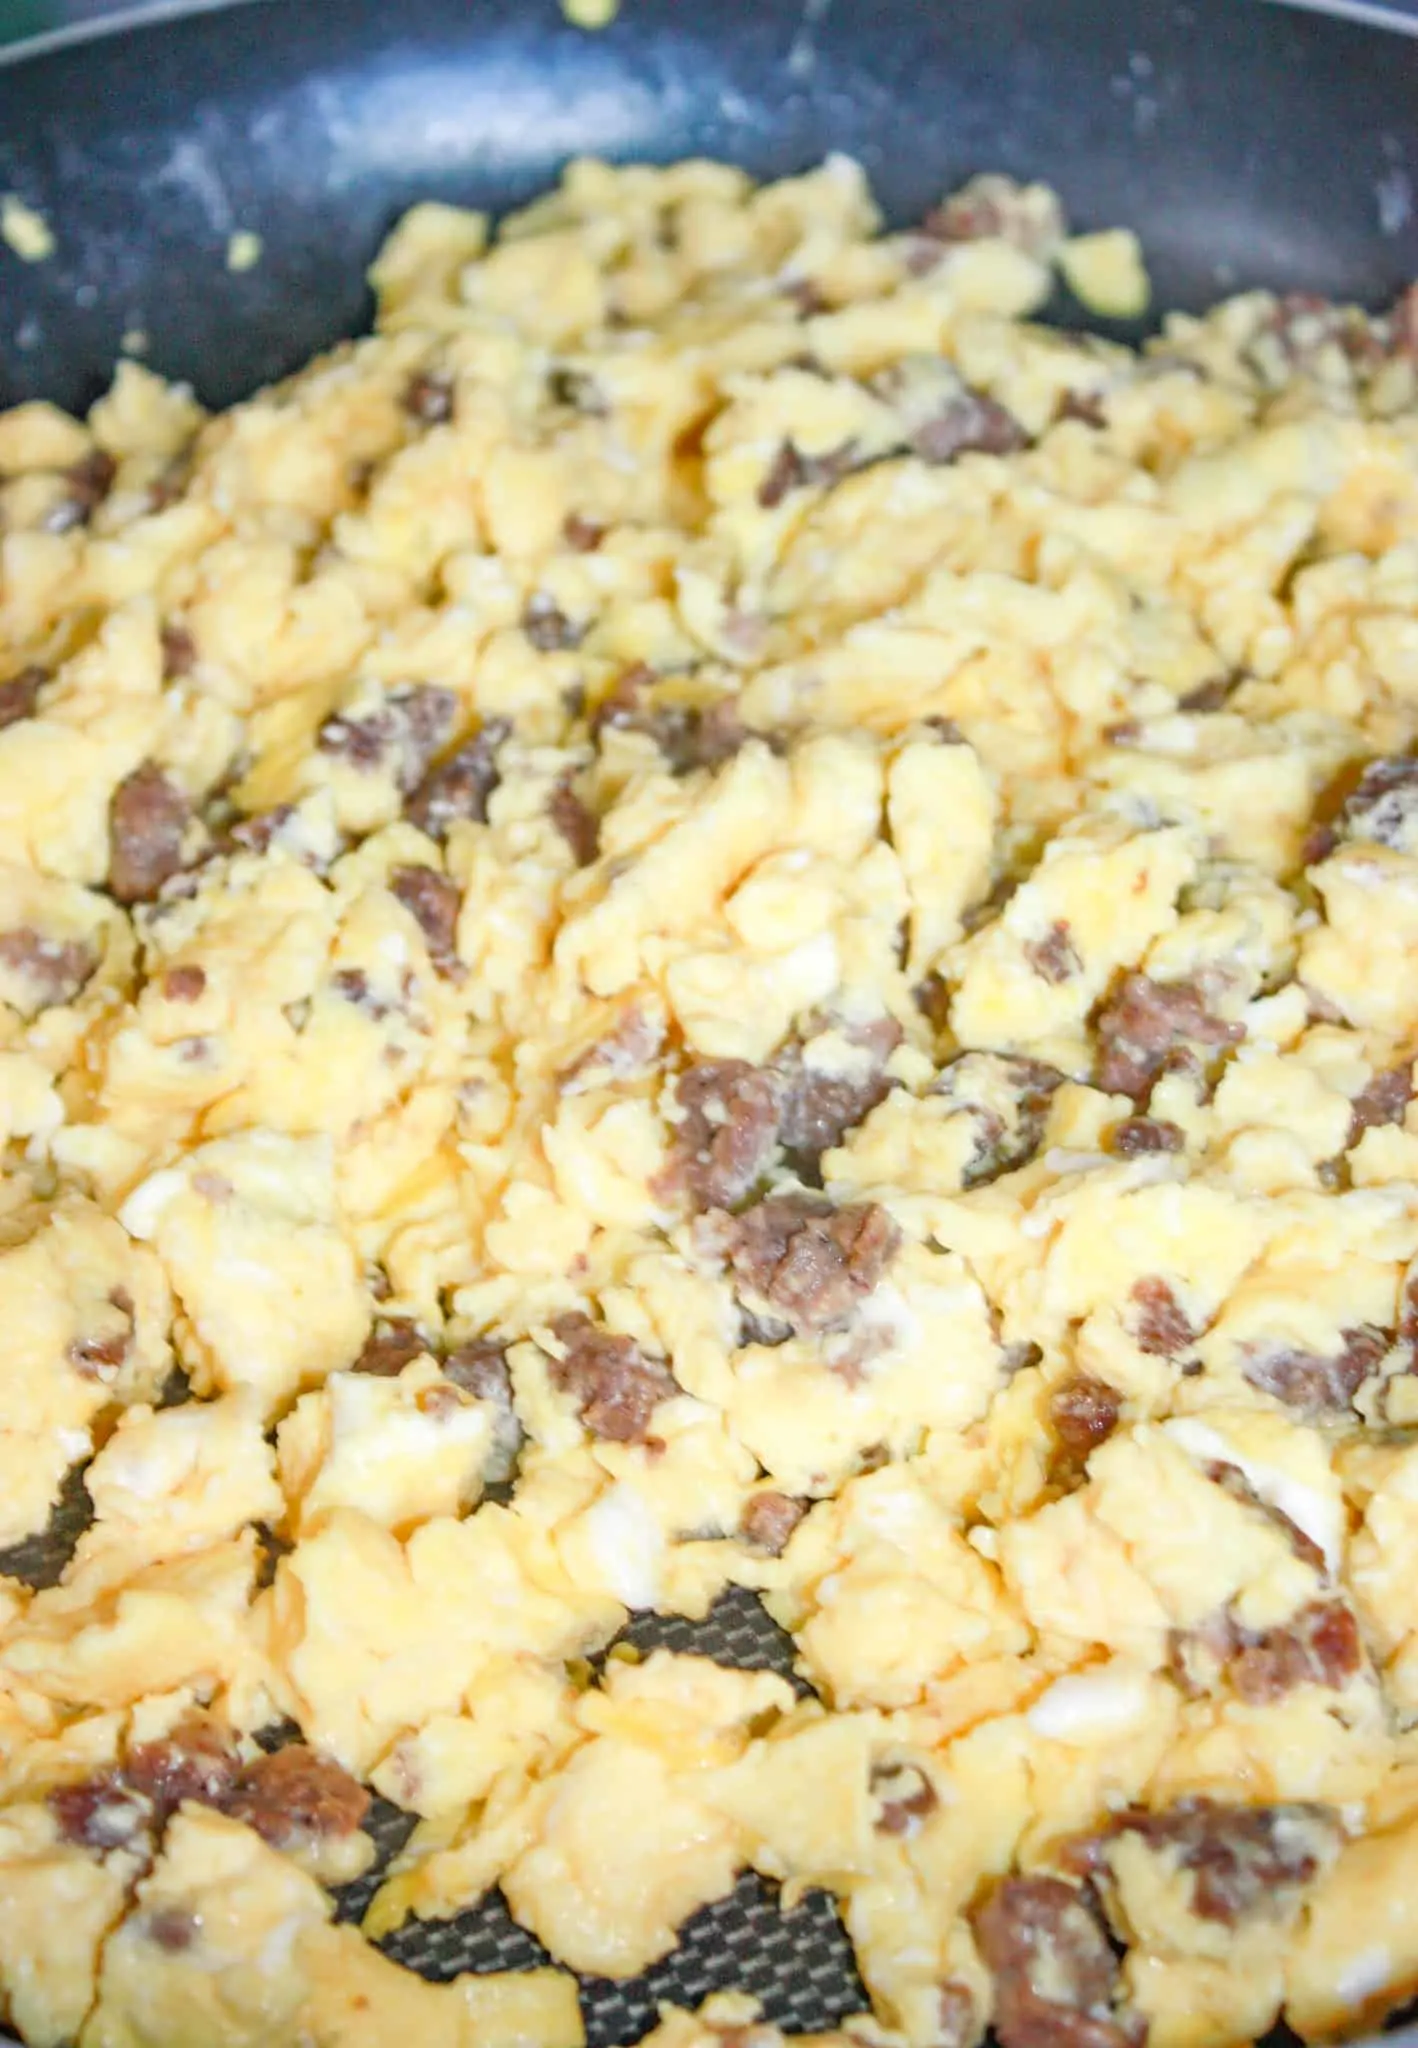 The venison and scrambled eggs.